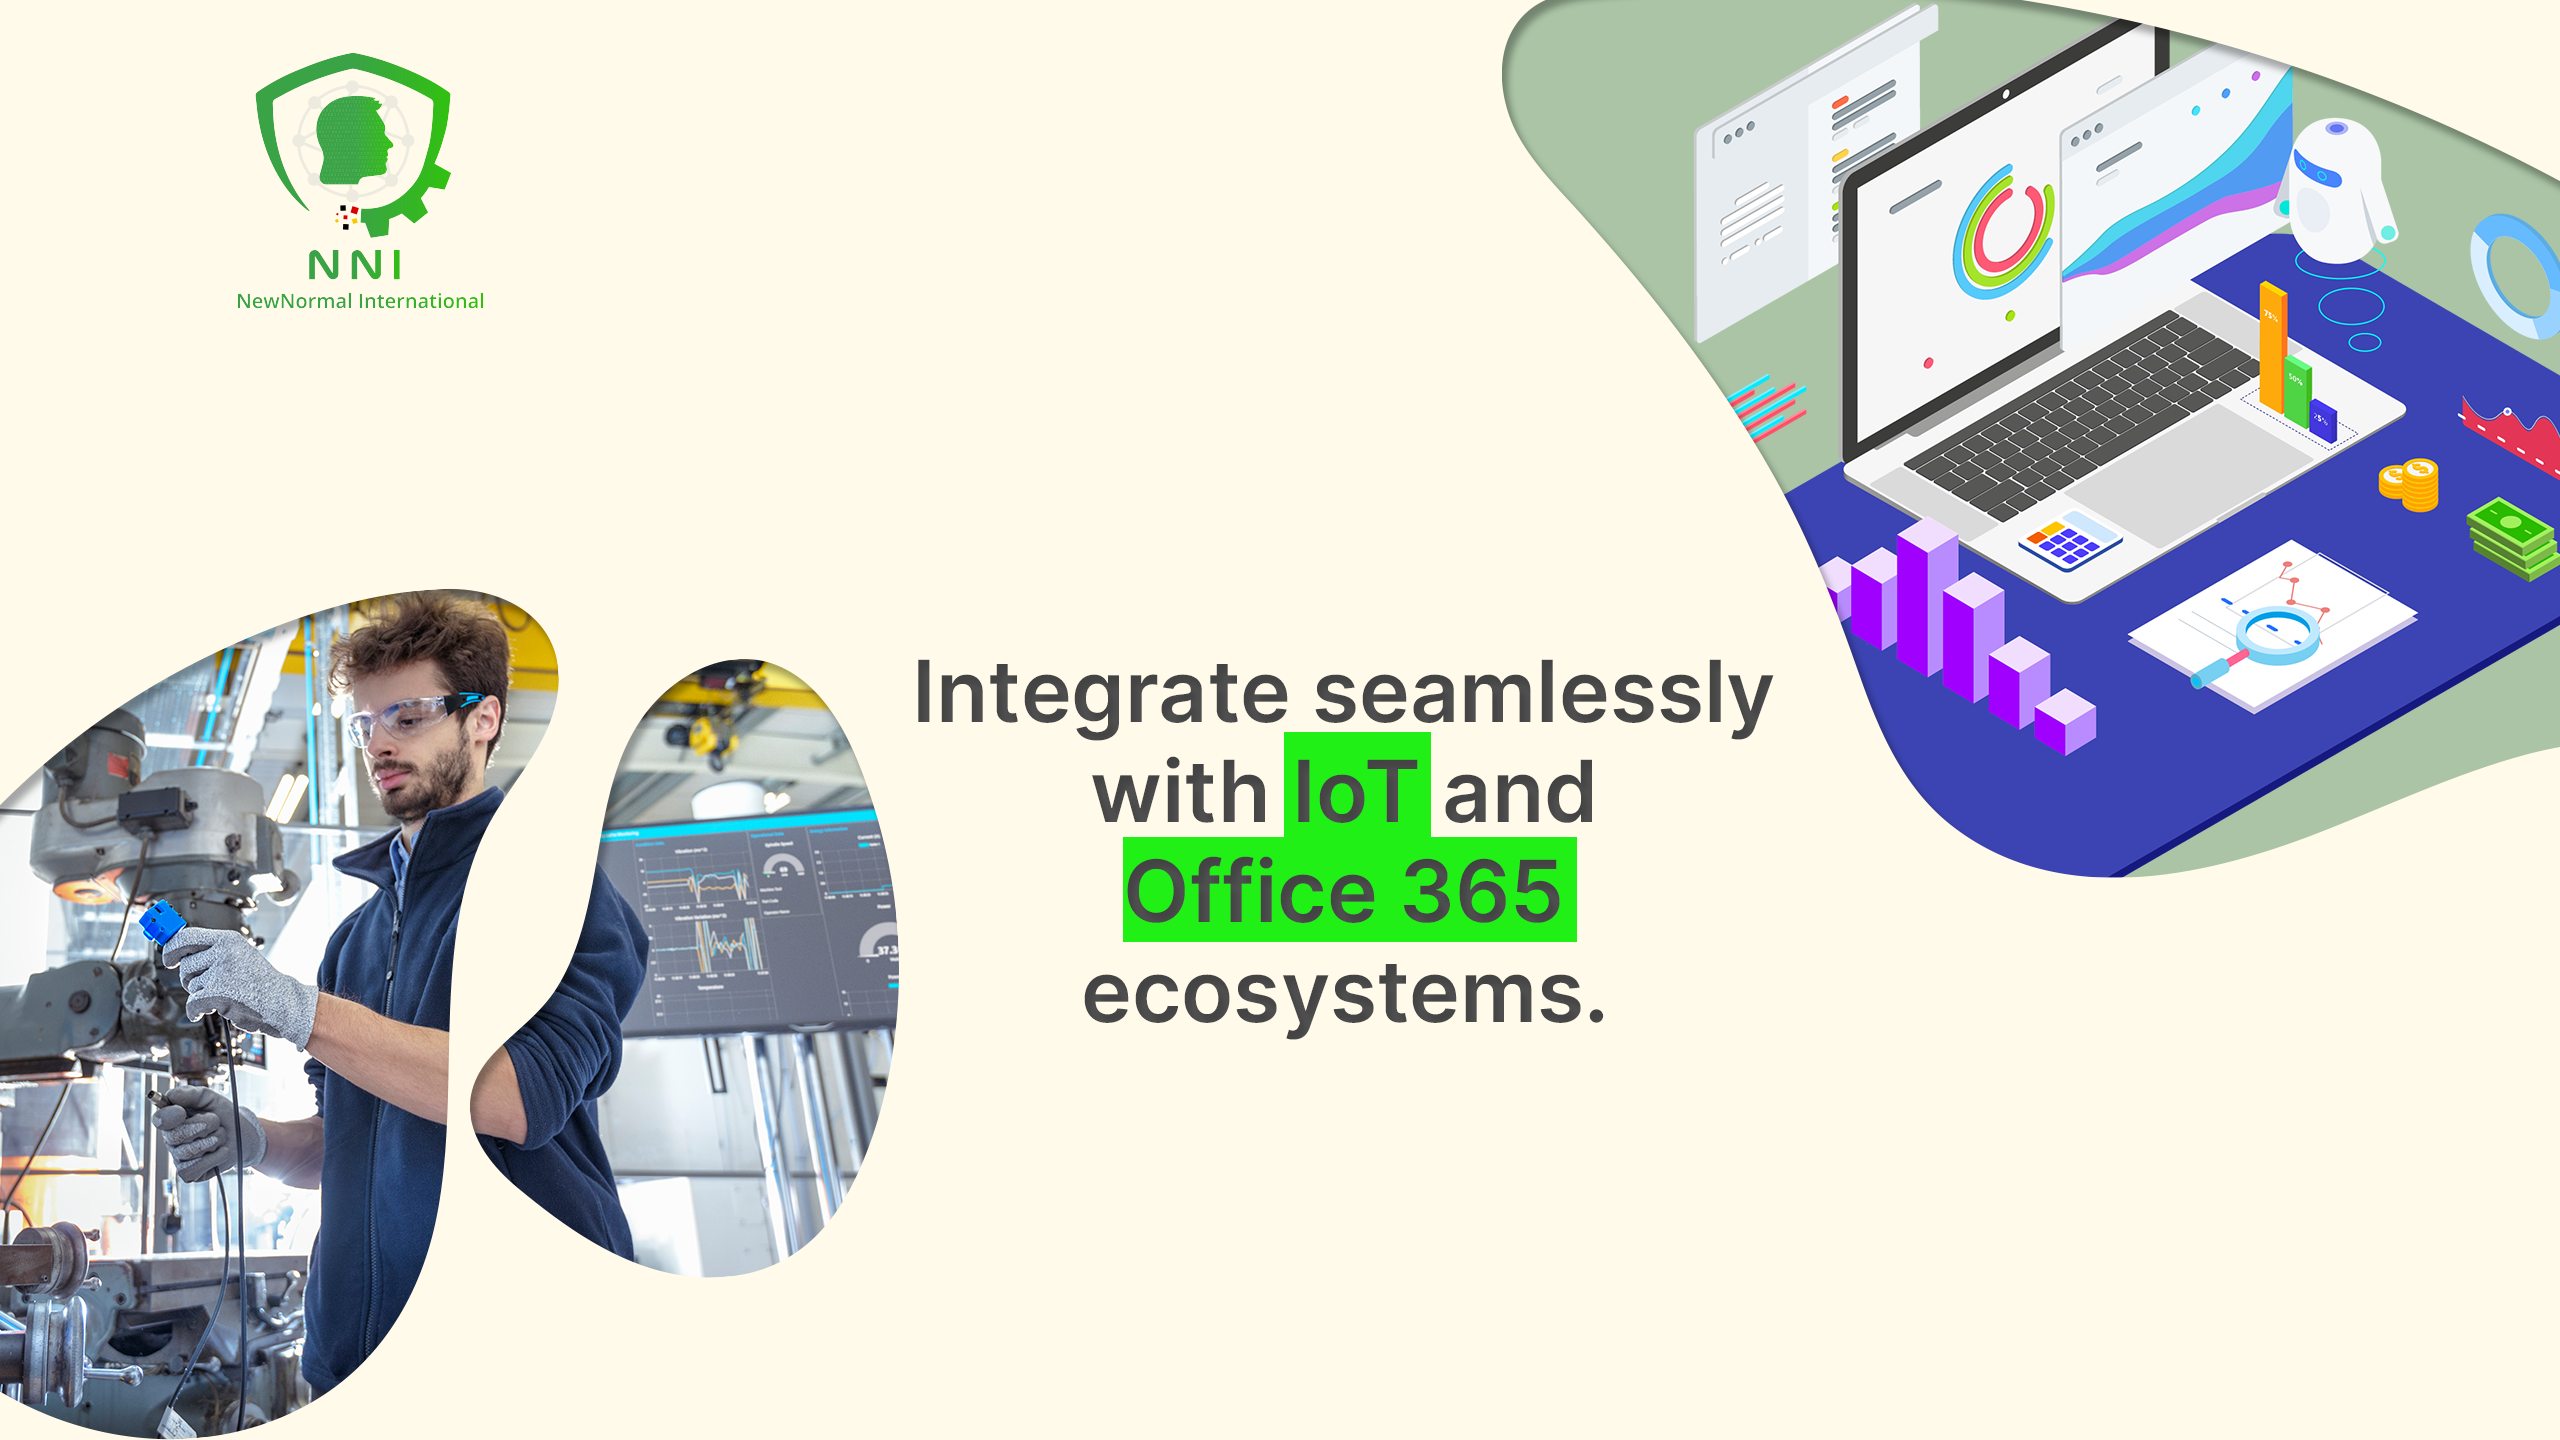 Seamless Integration with IoT and Office 365 Ecosystems